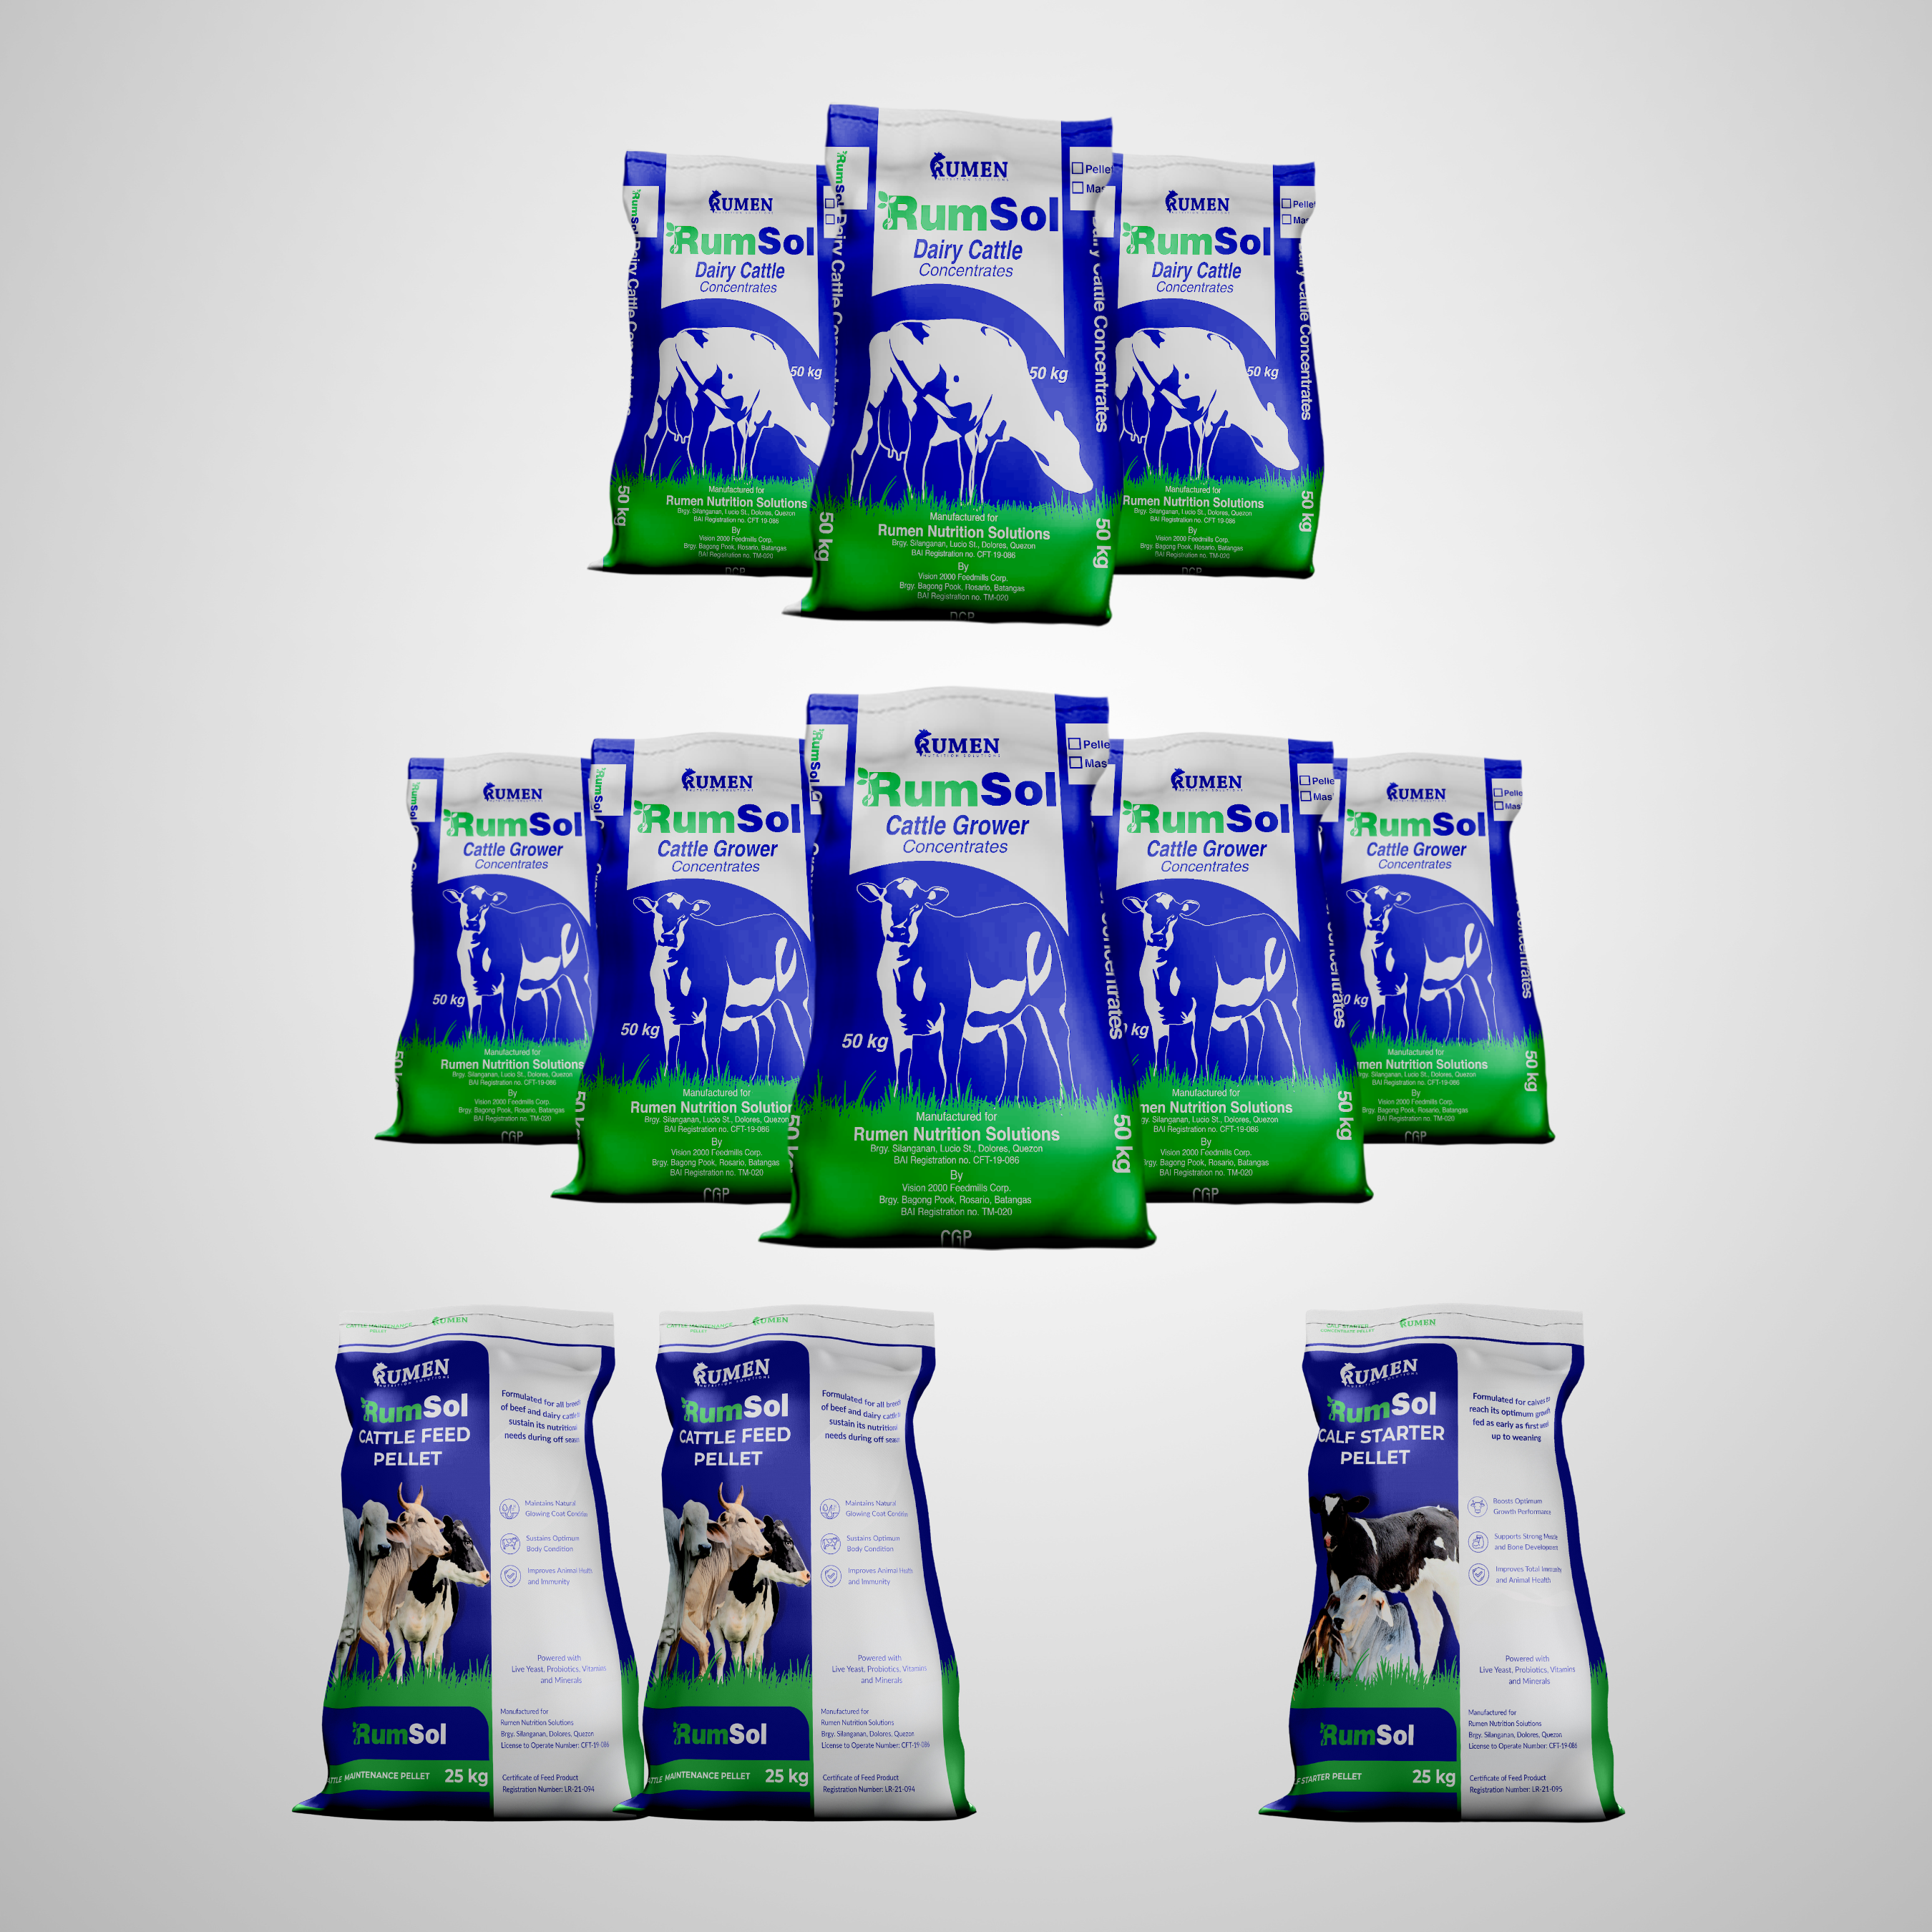 Bundle 10: Cattle Grower Concentrates, Dairy Cattle Concentrate, Cattle Feed Pellet & Calf Starter Pellet